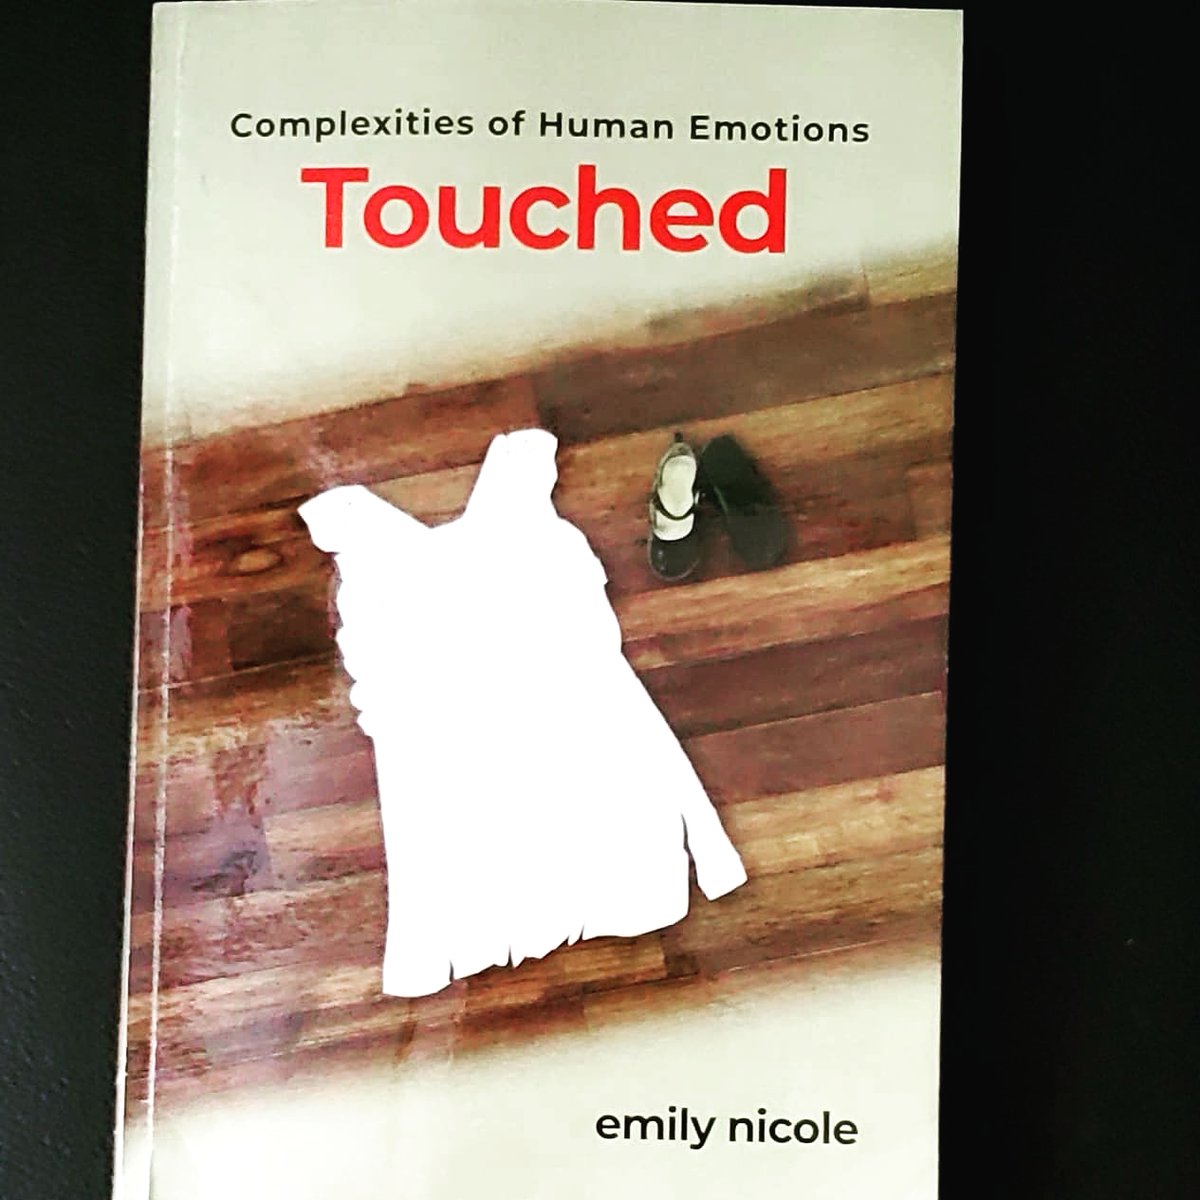 Did you get your book yet? 
Touched tells the story of a young woman dealing with past trauma showing up in her present life. 
#ComplexitiesofHumanEmotions #Touched #emilynicole #author #novels #debutnovel #writer #amwriting #bookclubselection #blackauthors